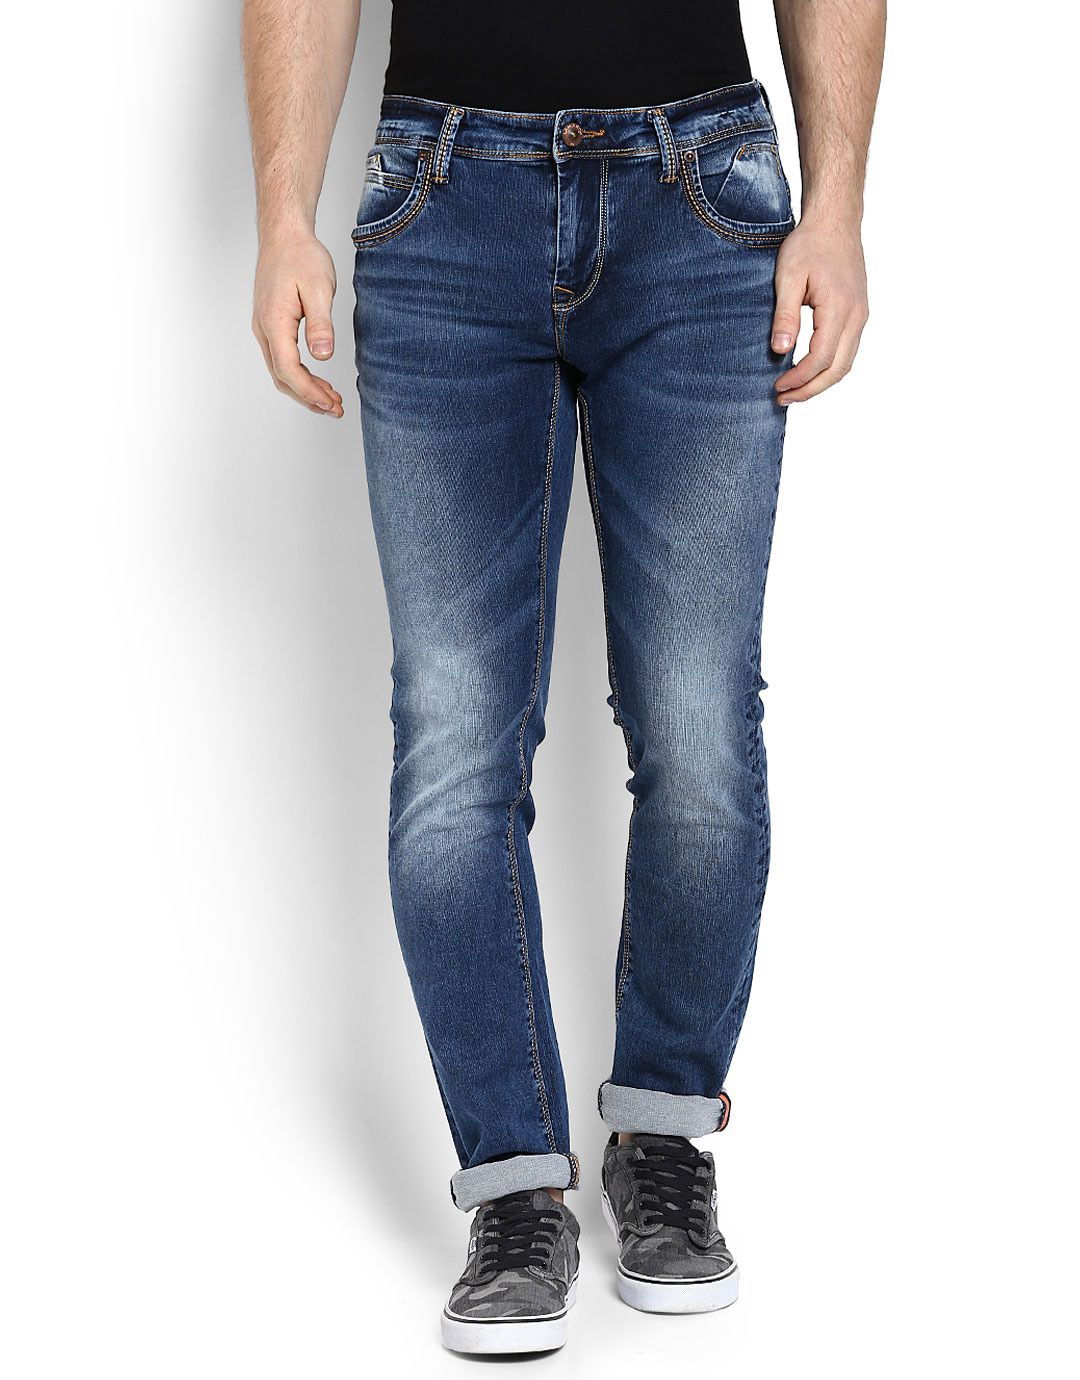 LAWMAN pg3 Blue Slim Jeans Snapdeal price. Jeans Deals at Snapdeal ...